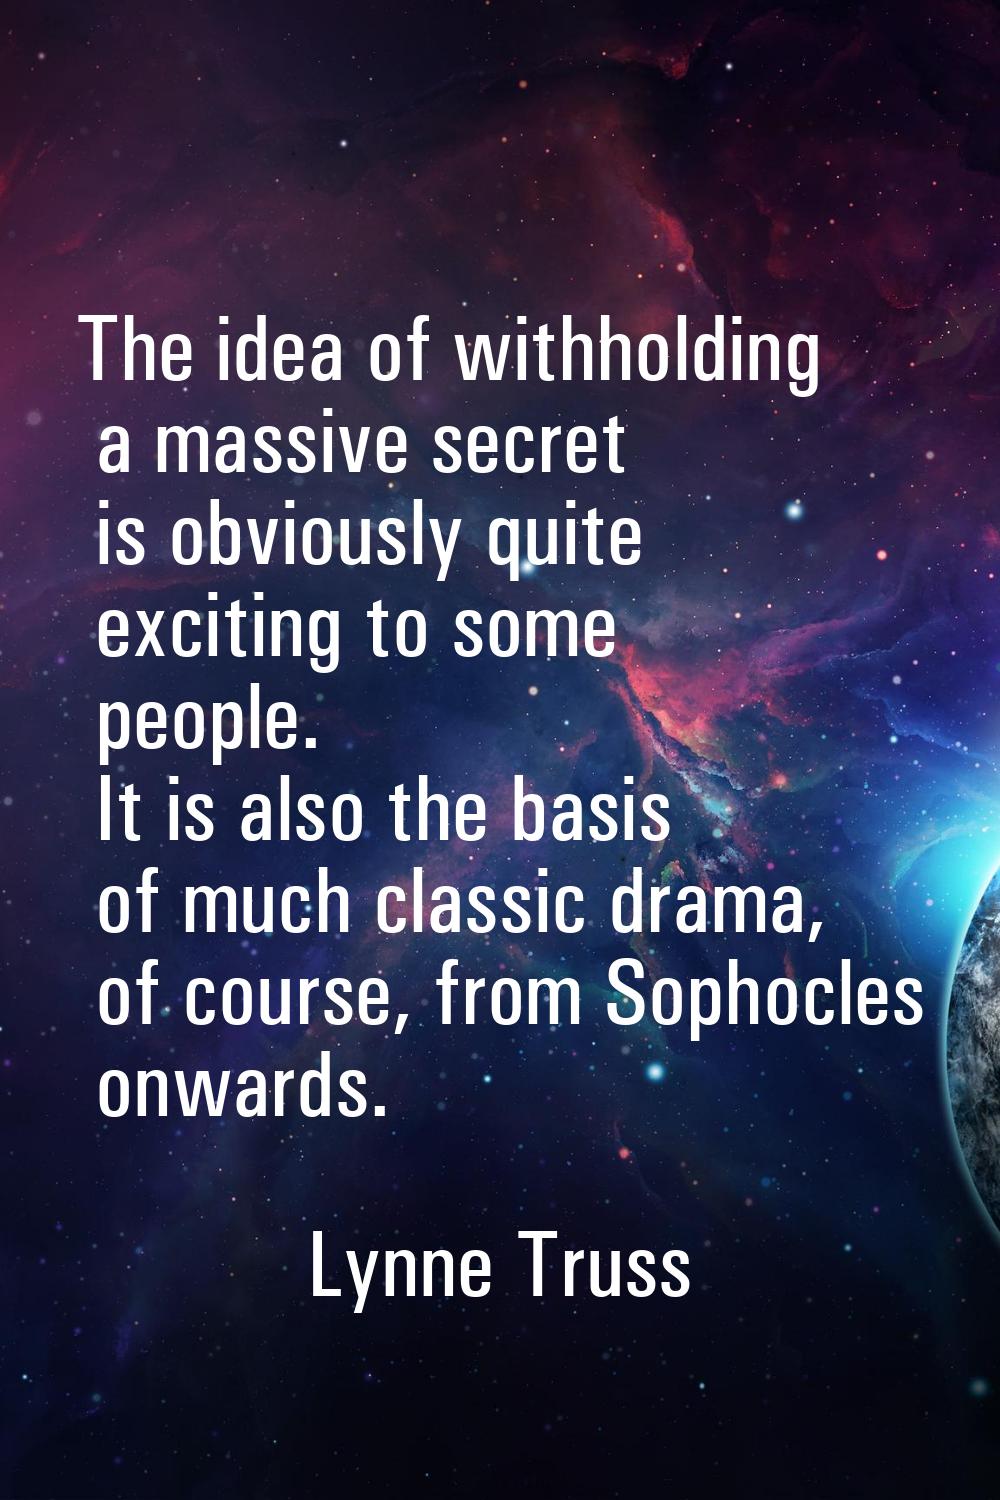 The idea of withholding a massive secret is obviously quite exciting to some people. It is also the